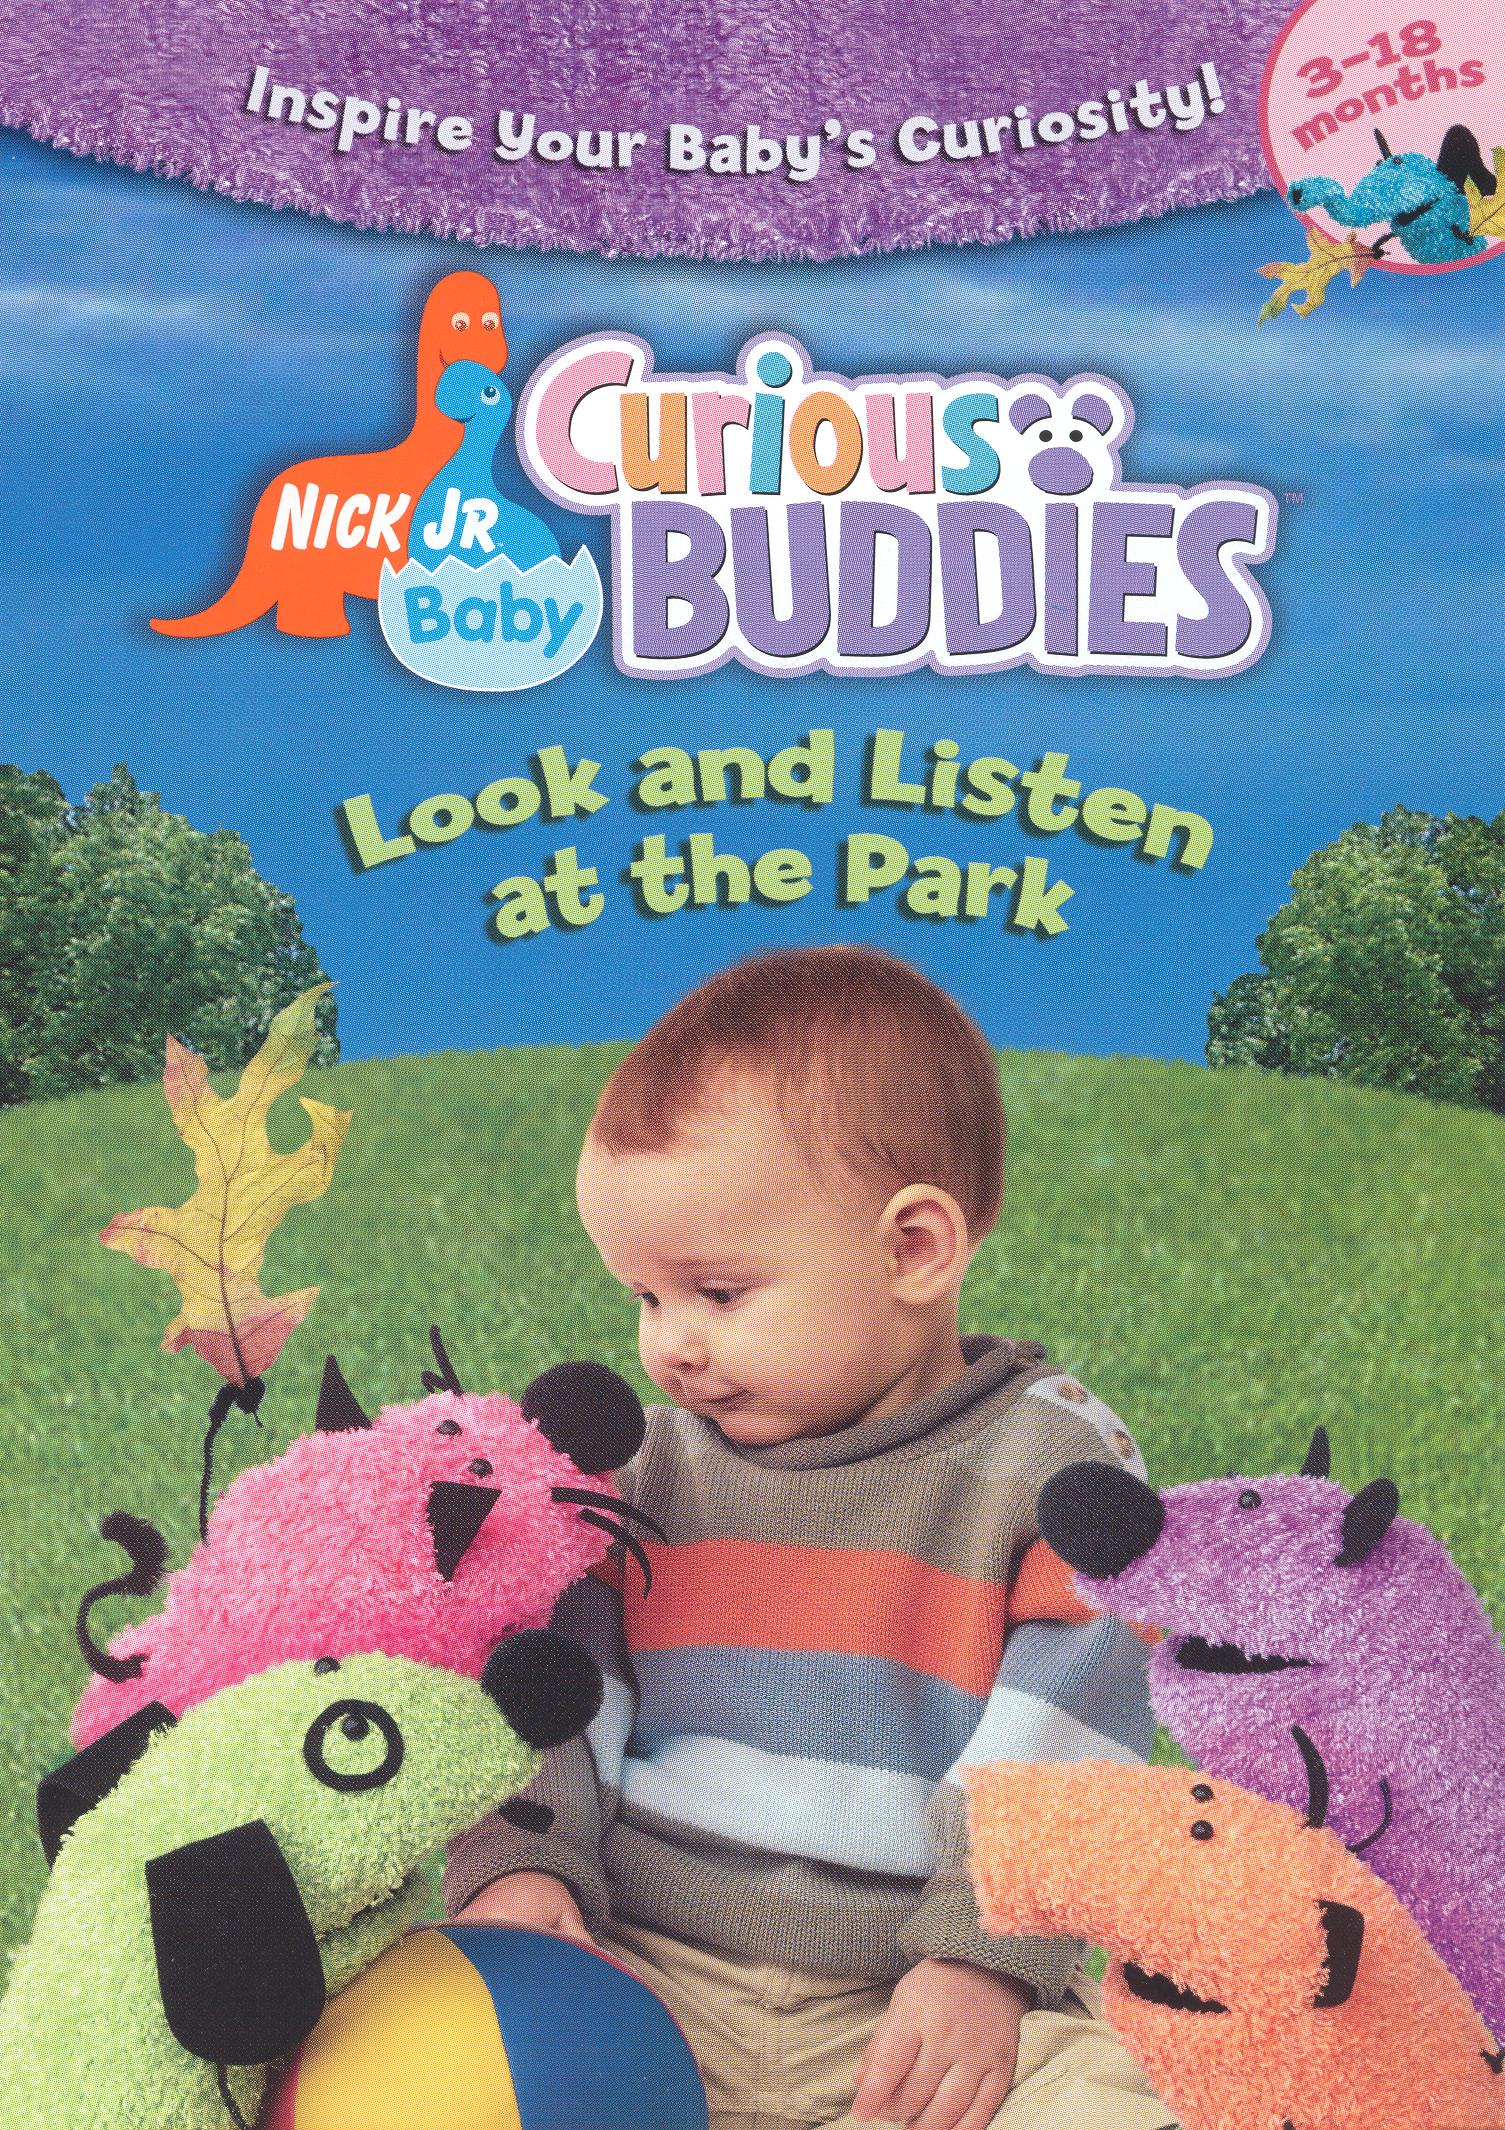 Best Buy: Nick Jr. Baby: Curious Buddies Look and Listen at the Park ...